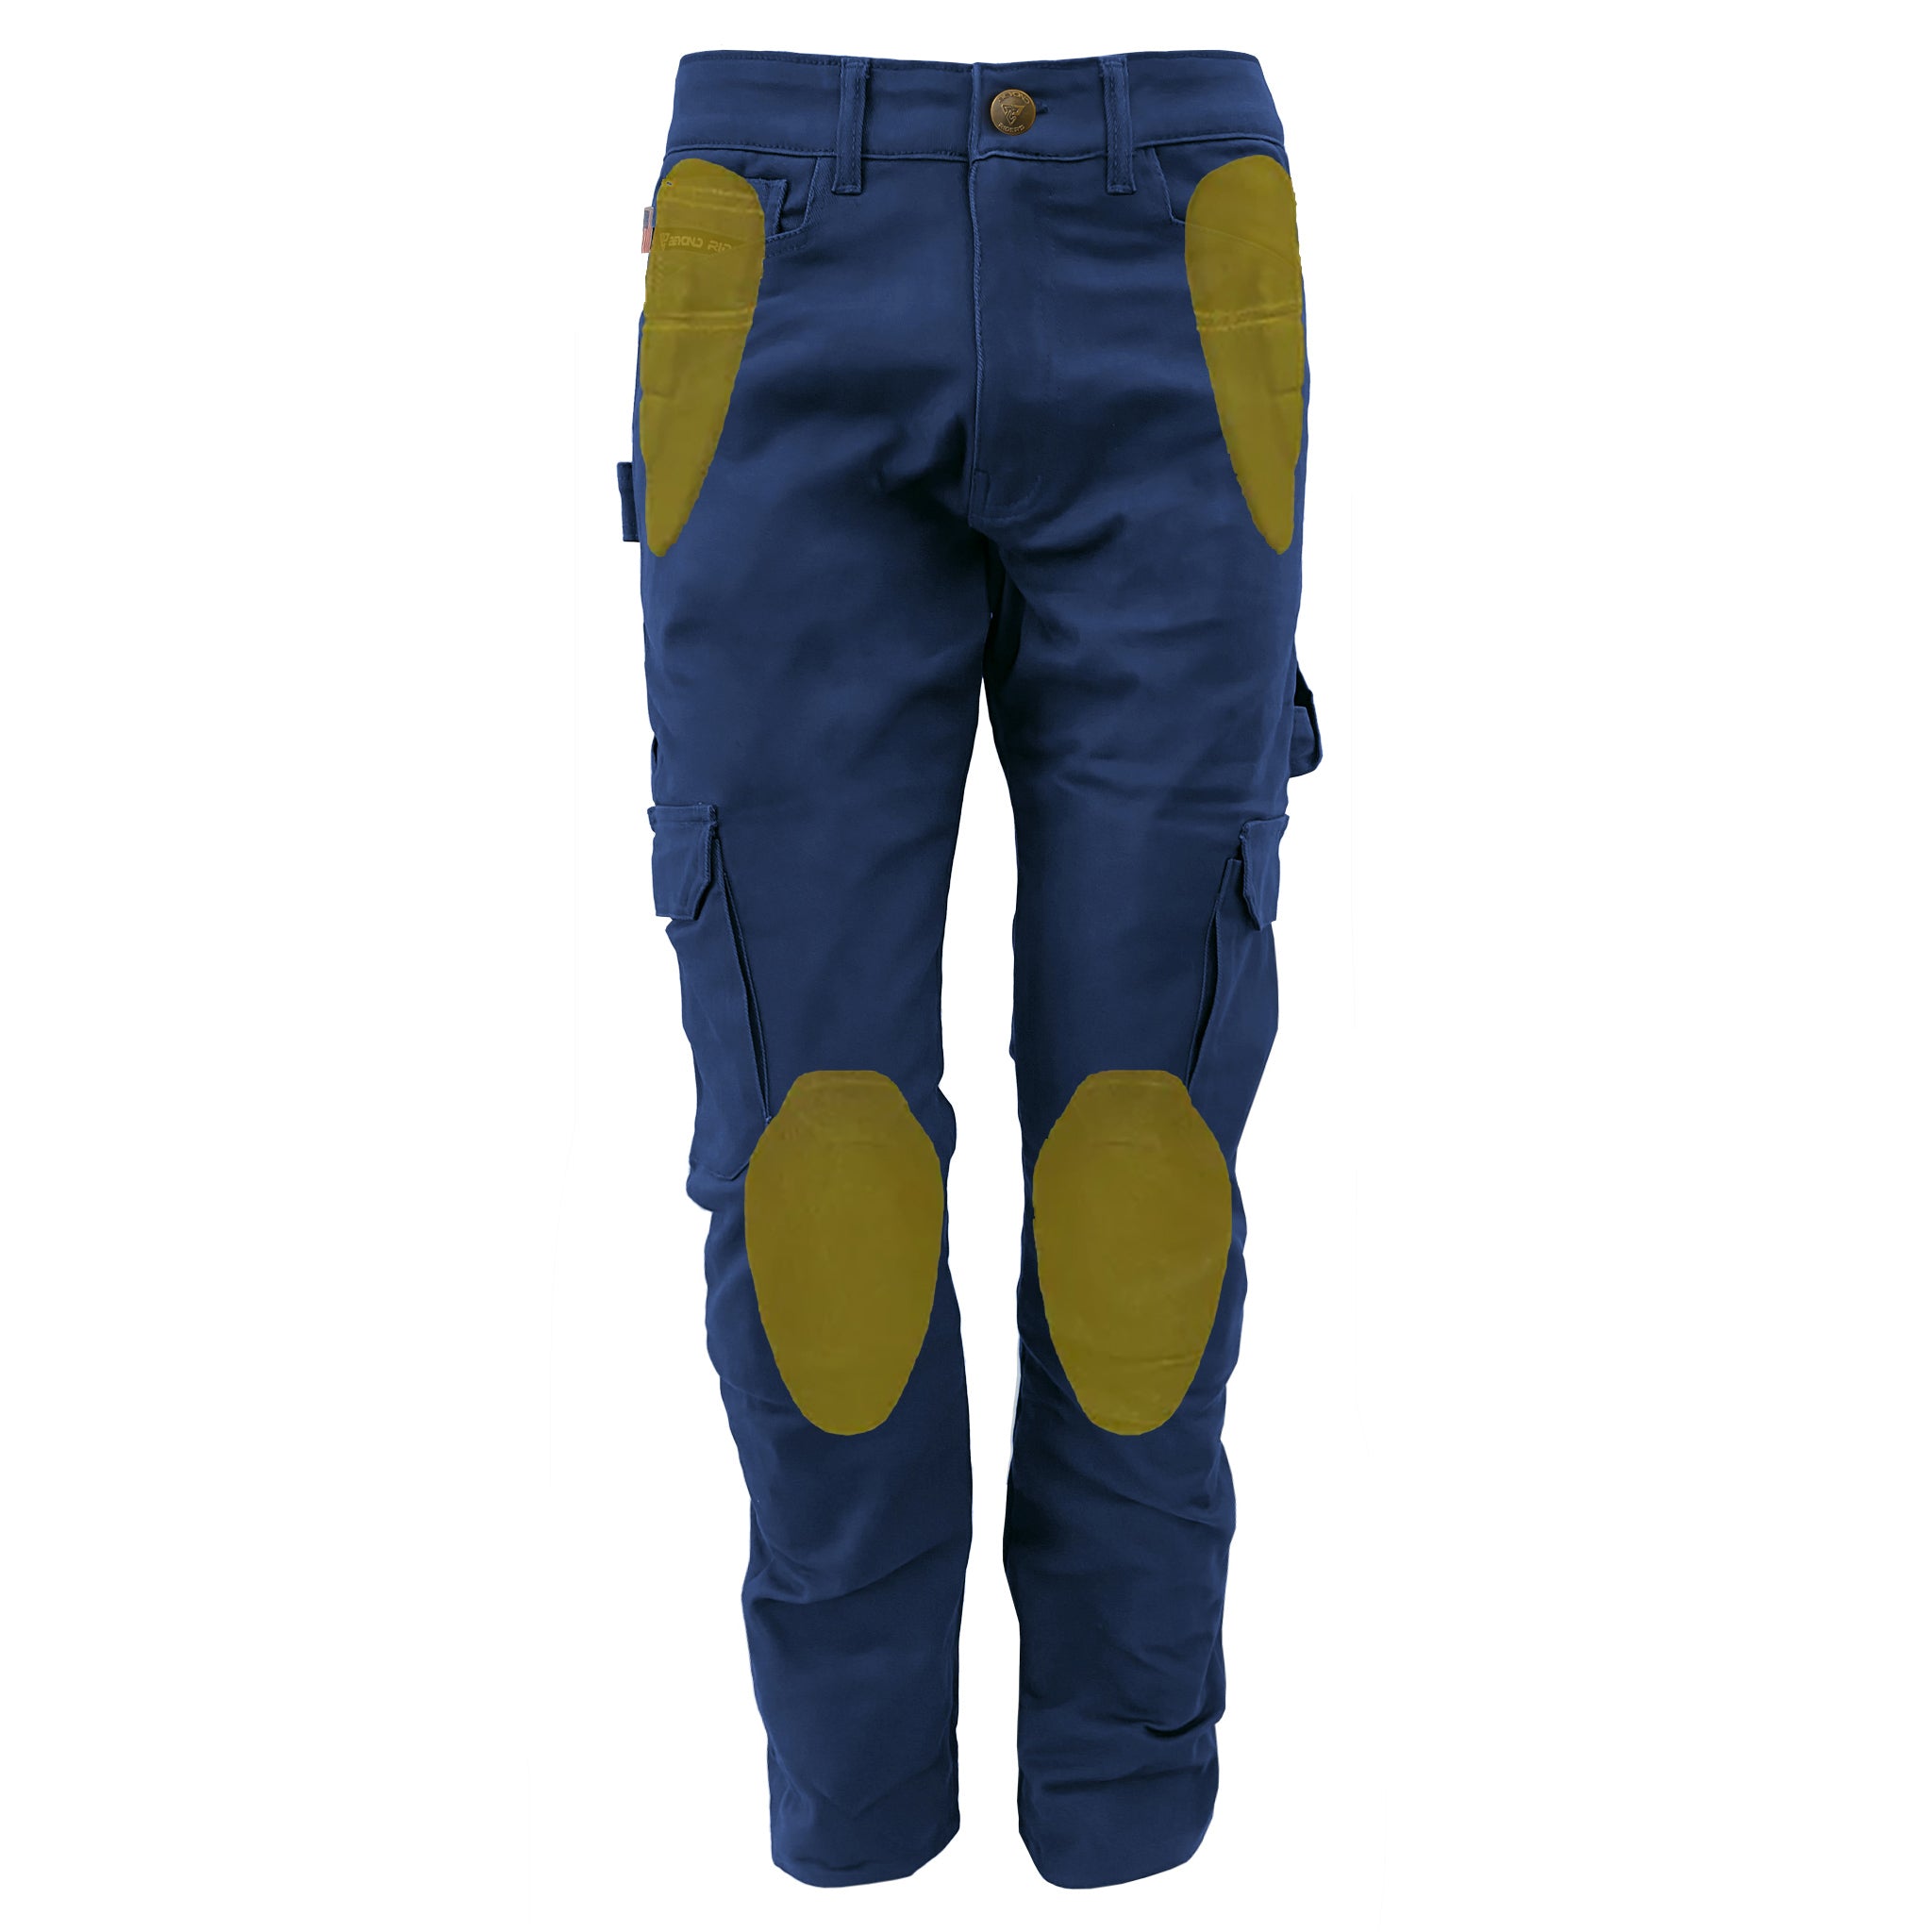 Men's-Cargo-Pants-Relaxed-Fit-Color-Navy-Blue-Front-With-Pads